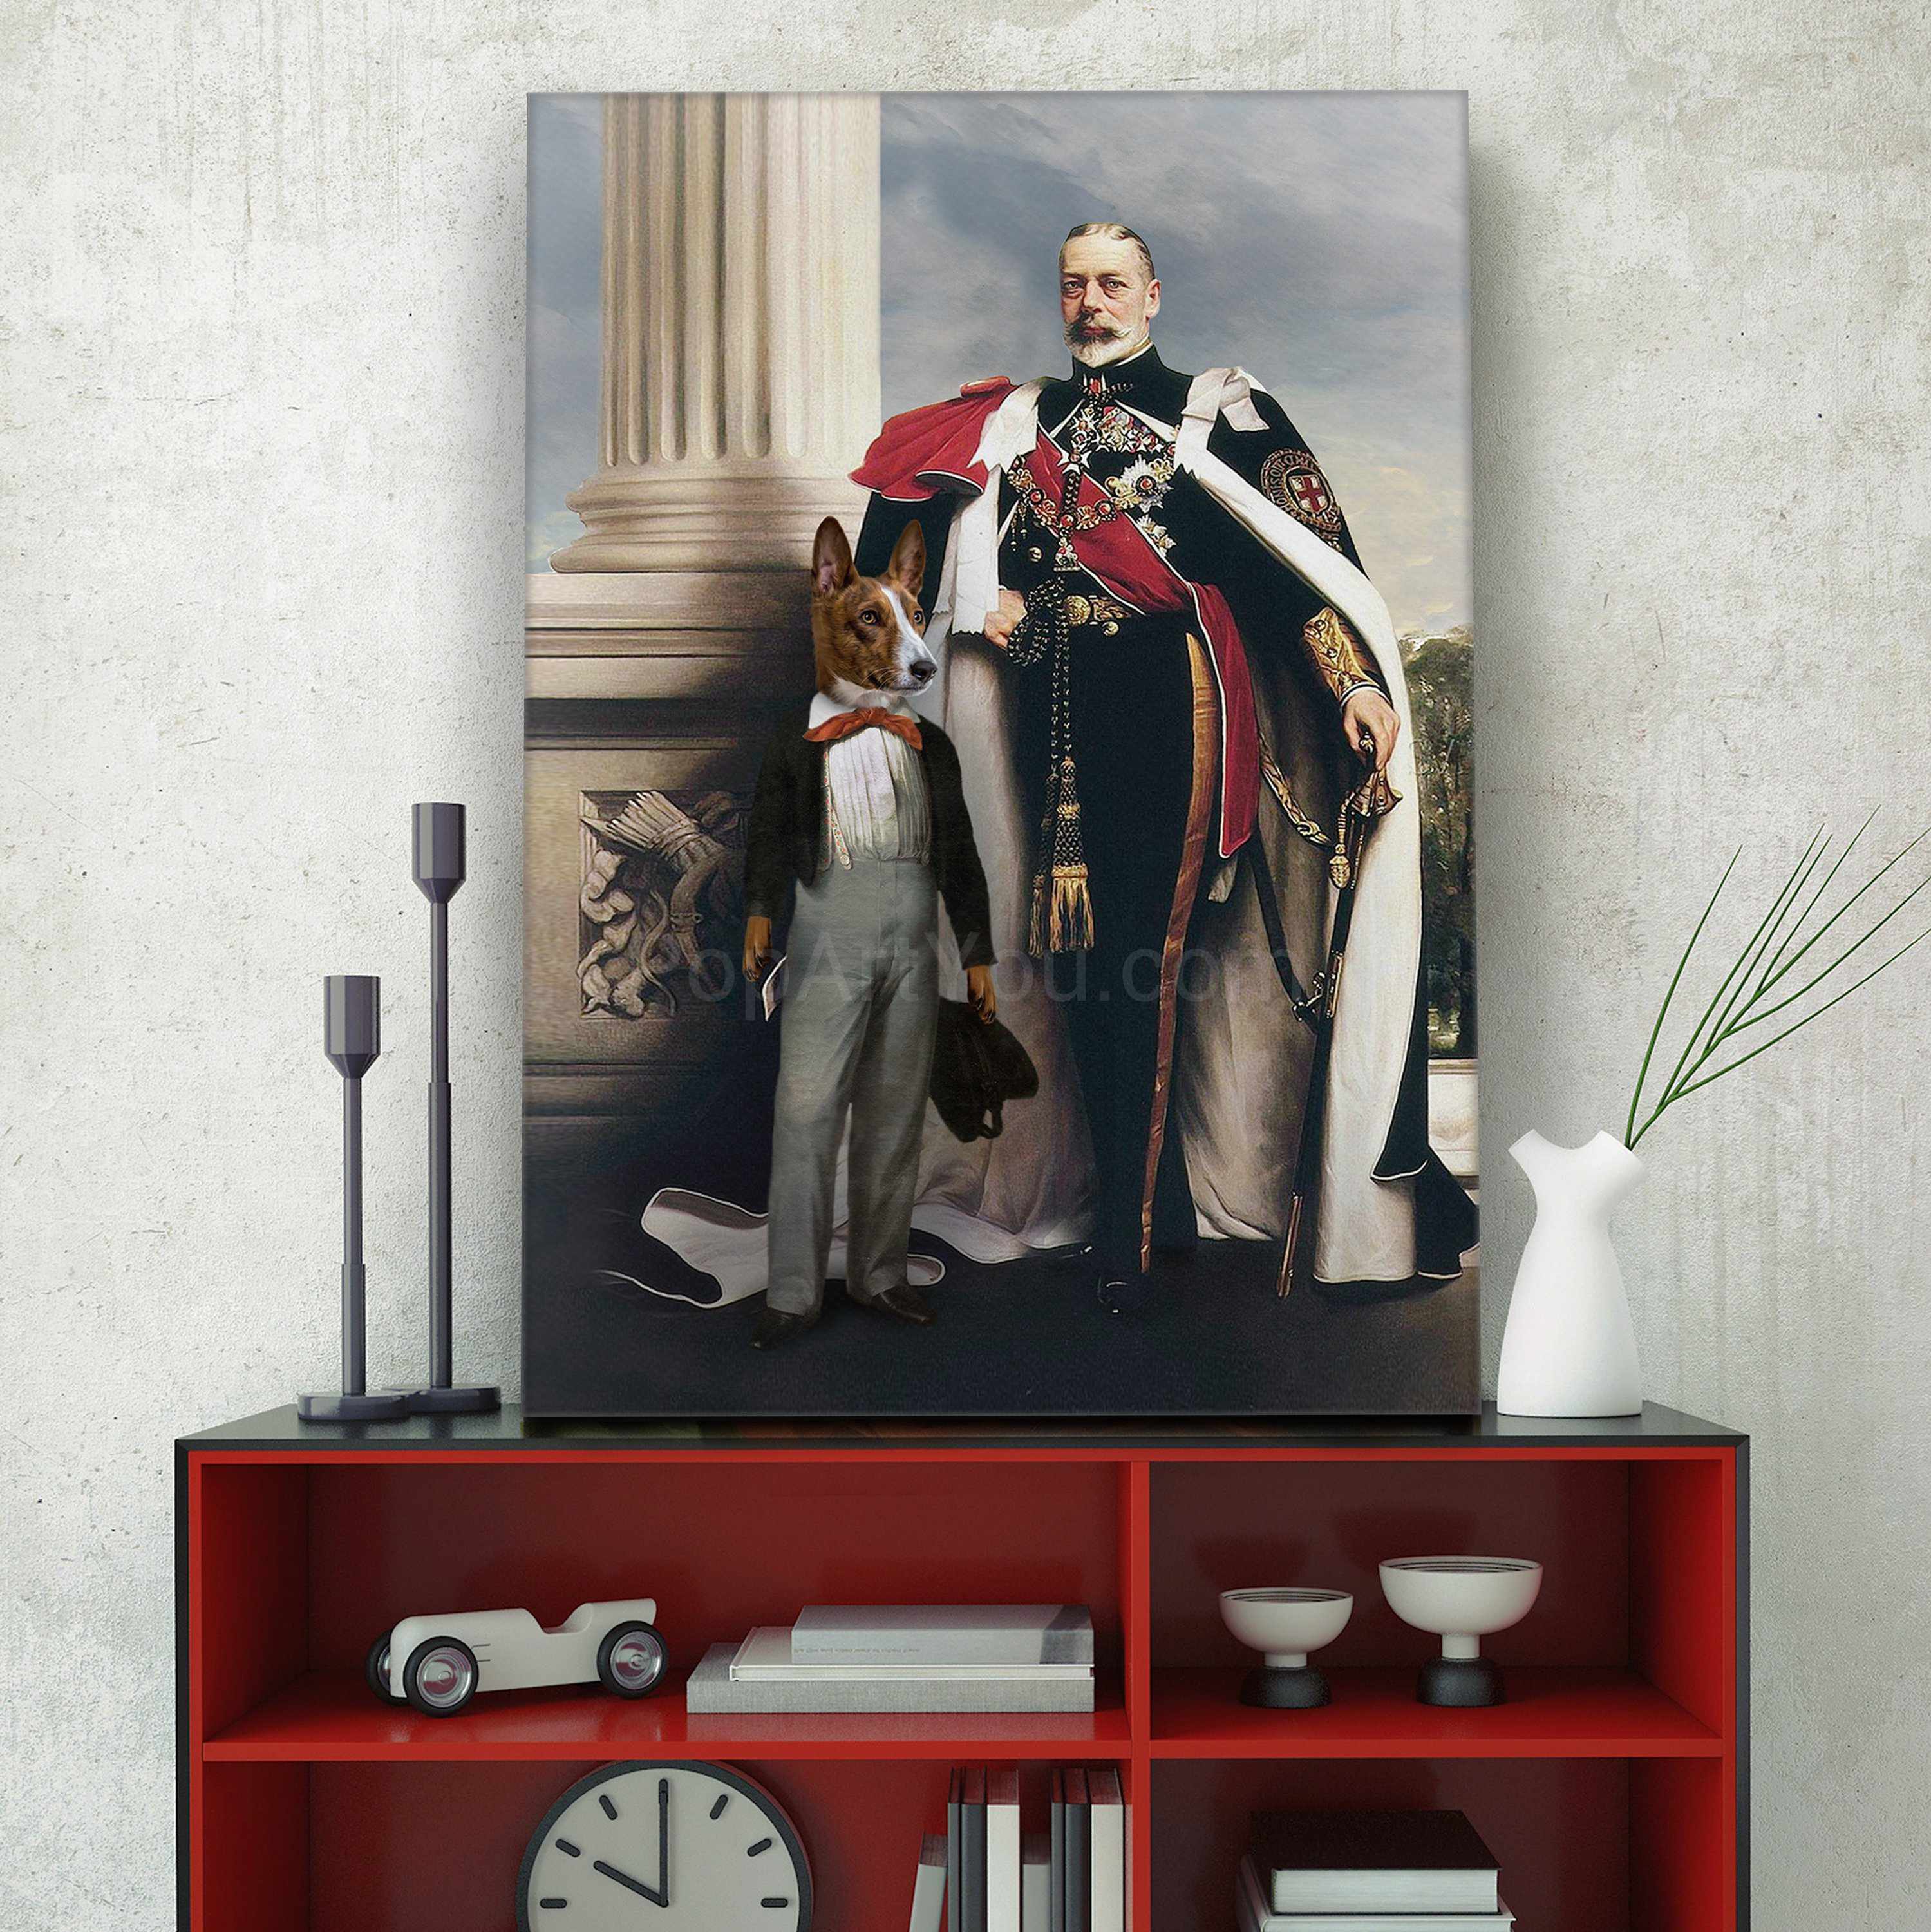 Portrait of an elderly man and a dog with the body of a man dressed in white royal clothes stands on a red table near the clock